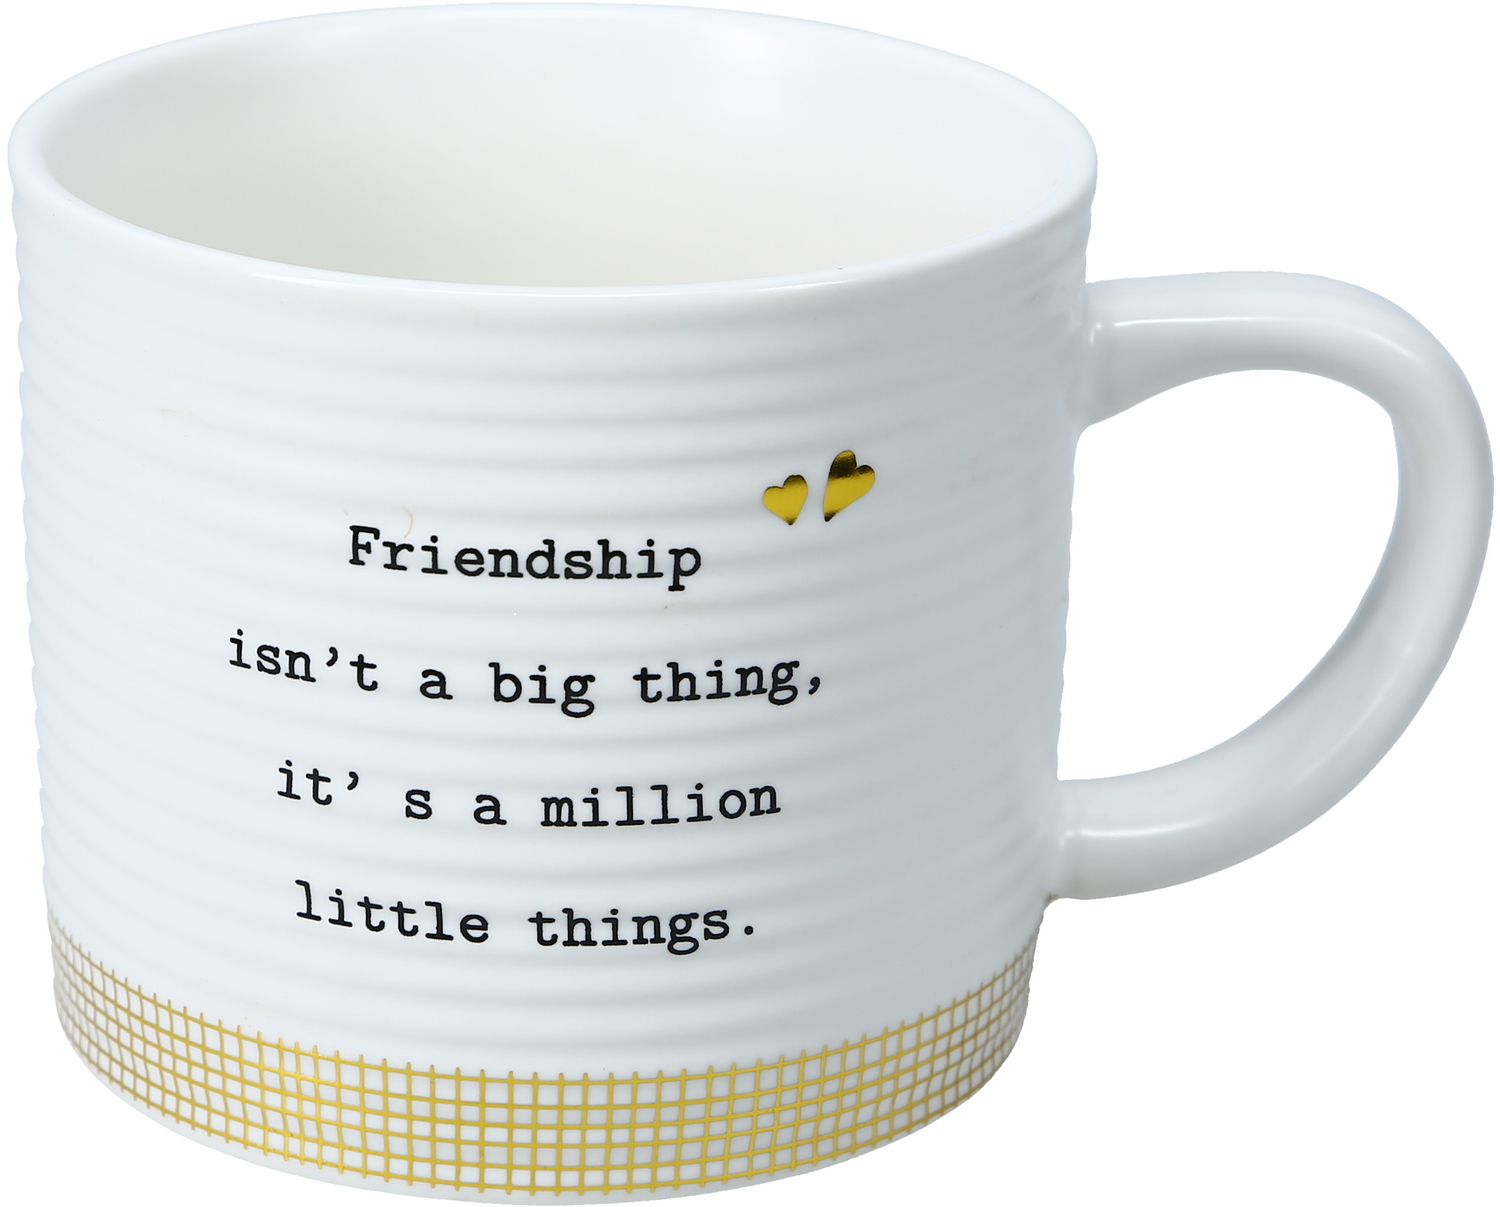 Million Little Things by Thoughtful Words - Million Little Things - 10 oz Mug